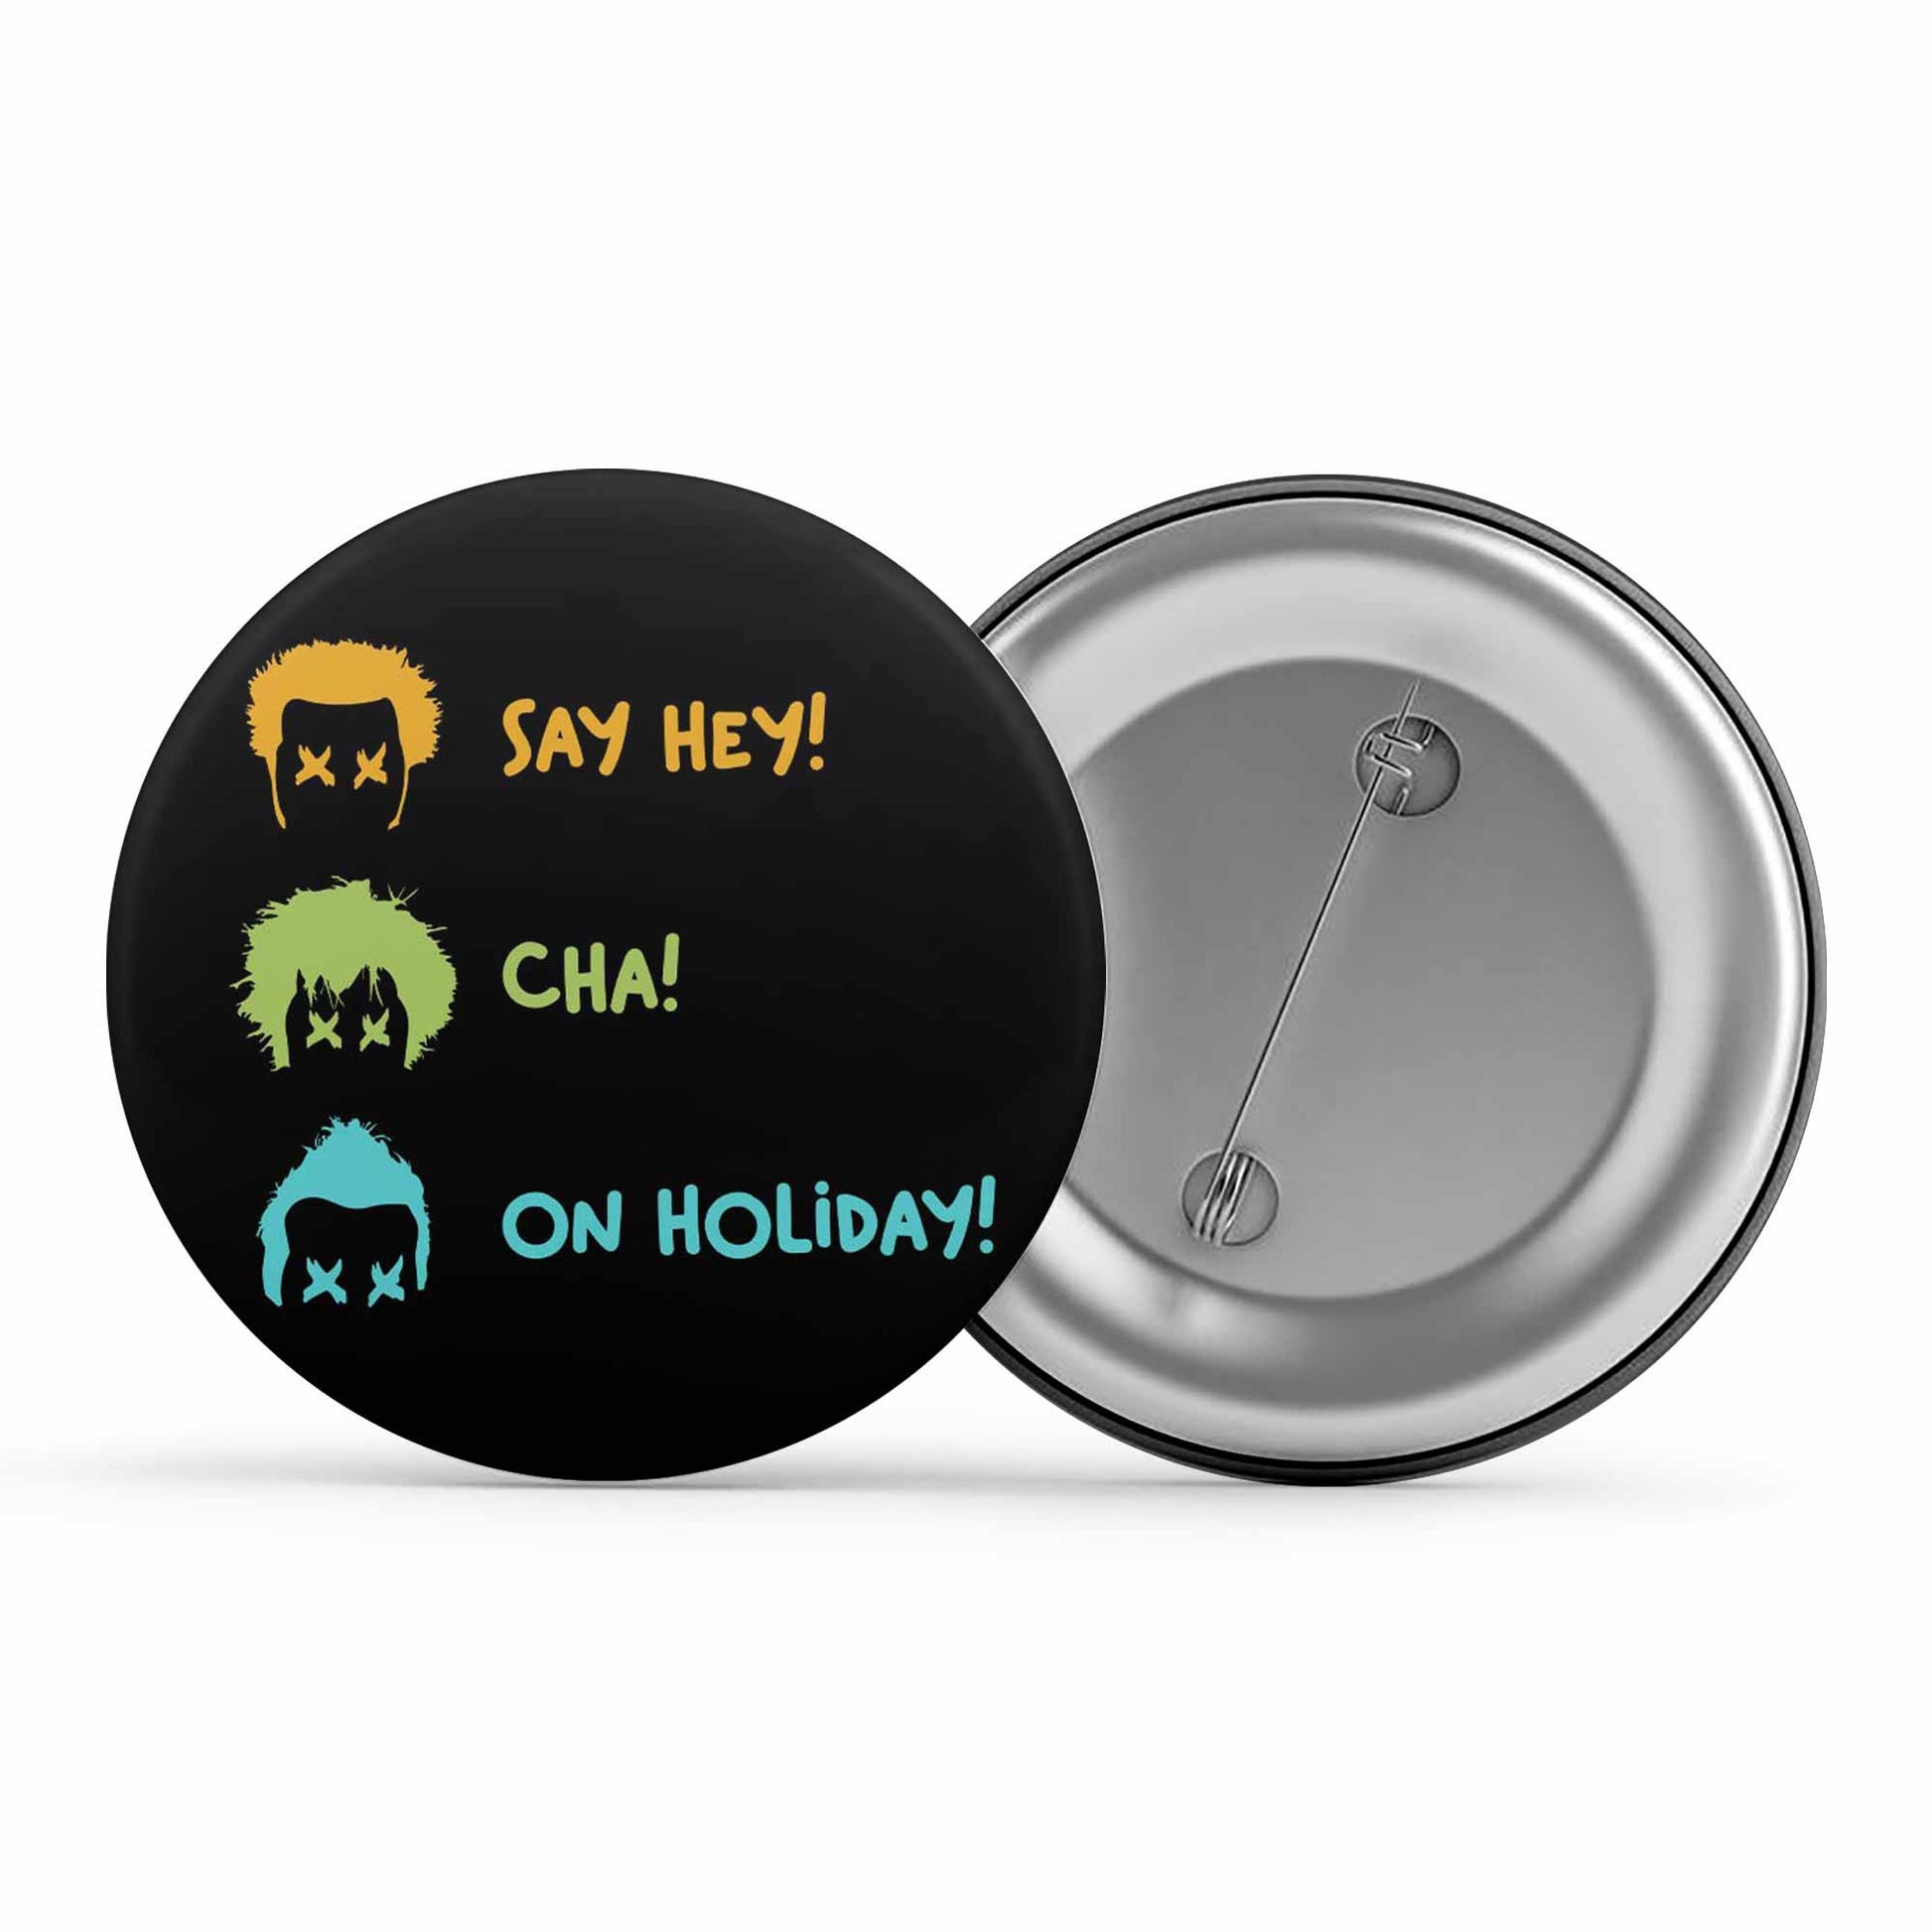 green day holiday badge pin button music band buy online india the banyan tee tbt men women girls boys unisex